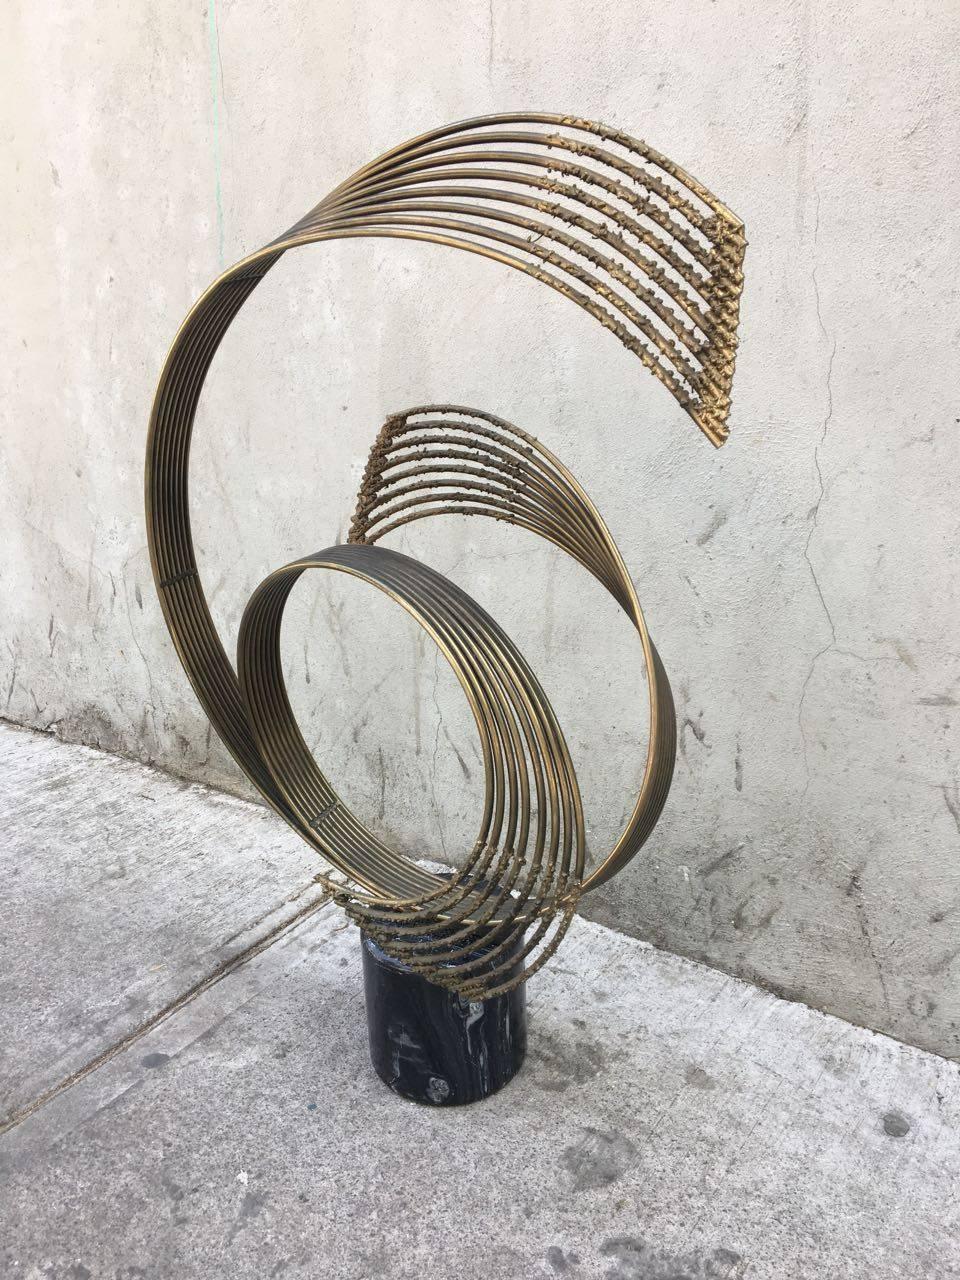 Abstract sculpture by Curtis Jere, made in steel and brass, with marble base.

Curtis Jere.